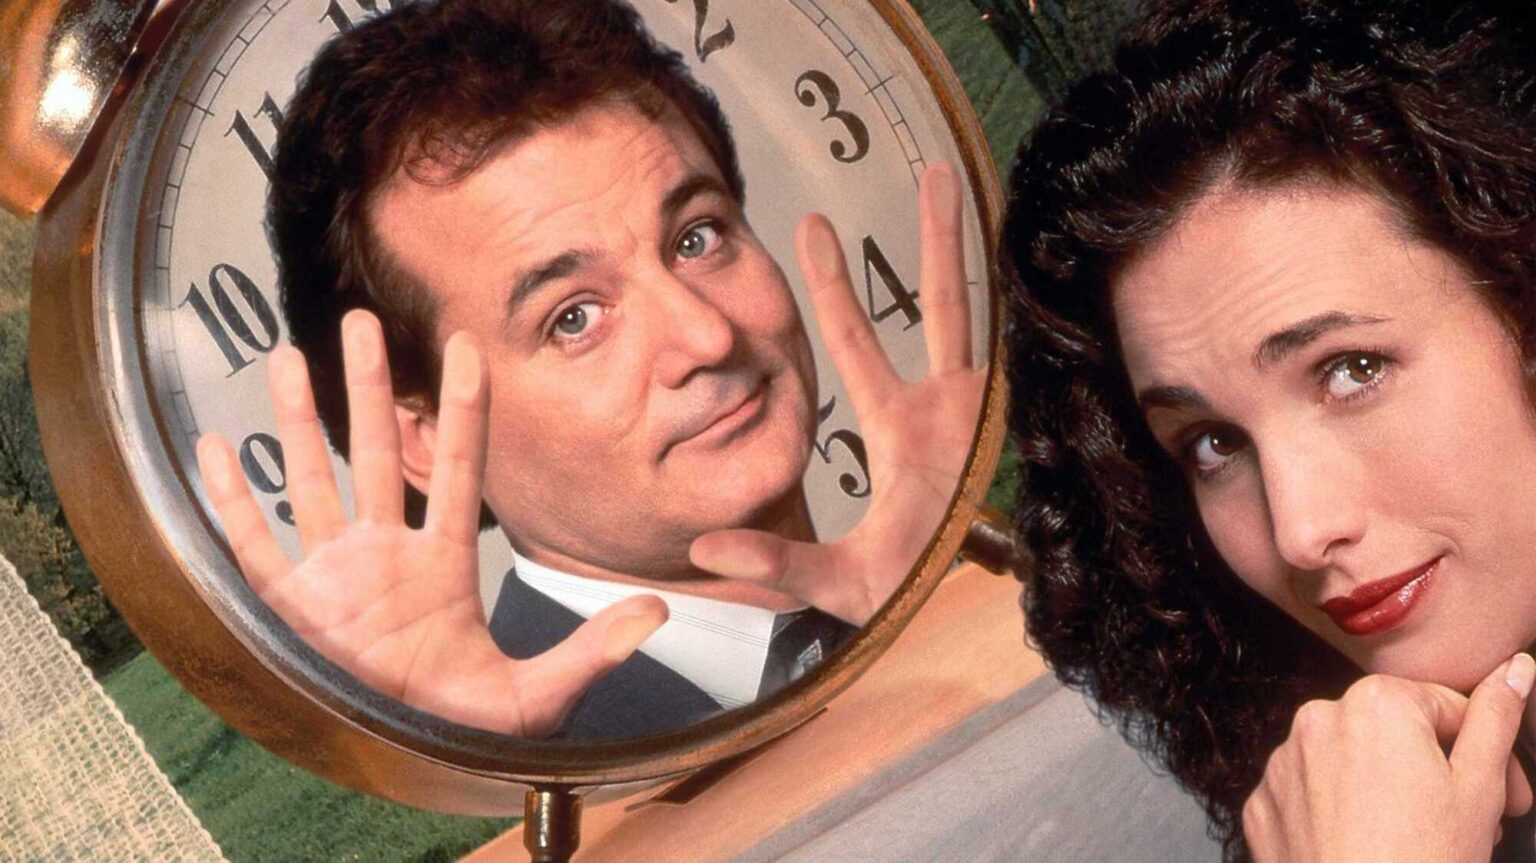 Could you live the same day over and over? Luckily the cast of the movie 'Groundhog Day' have only moved forward. Check out the actors in 2021.